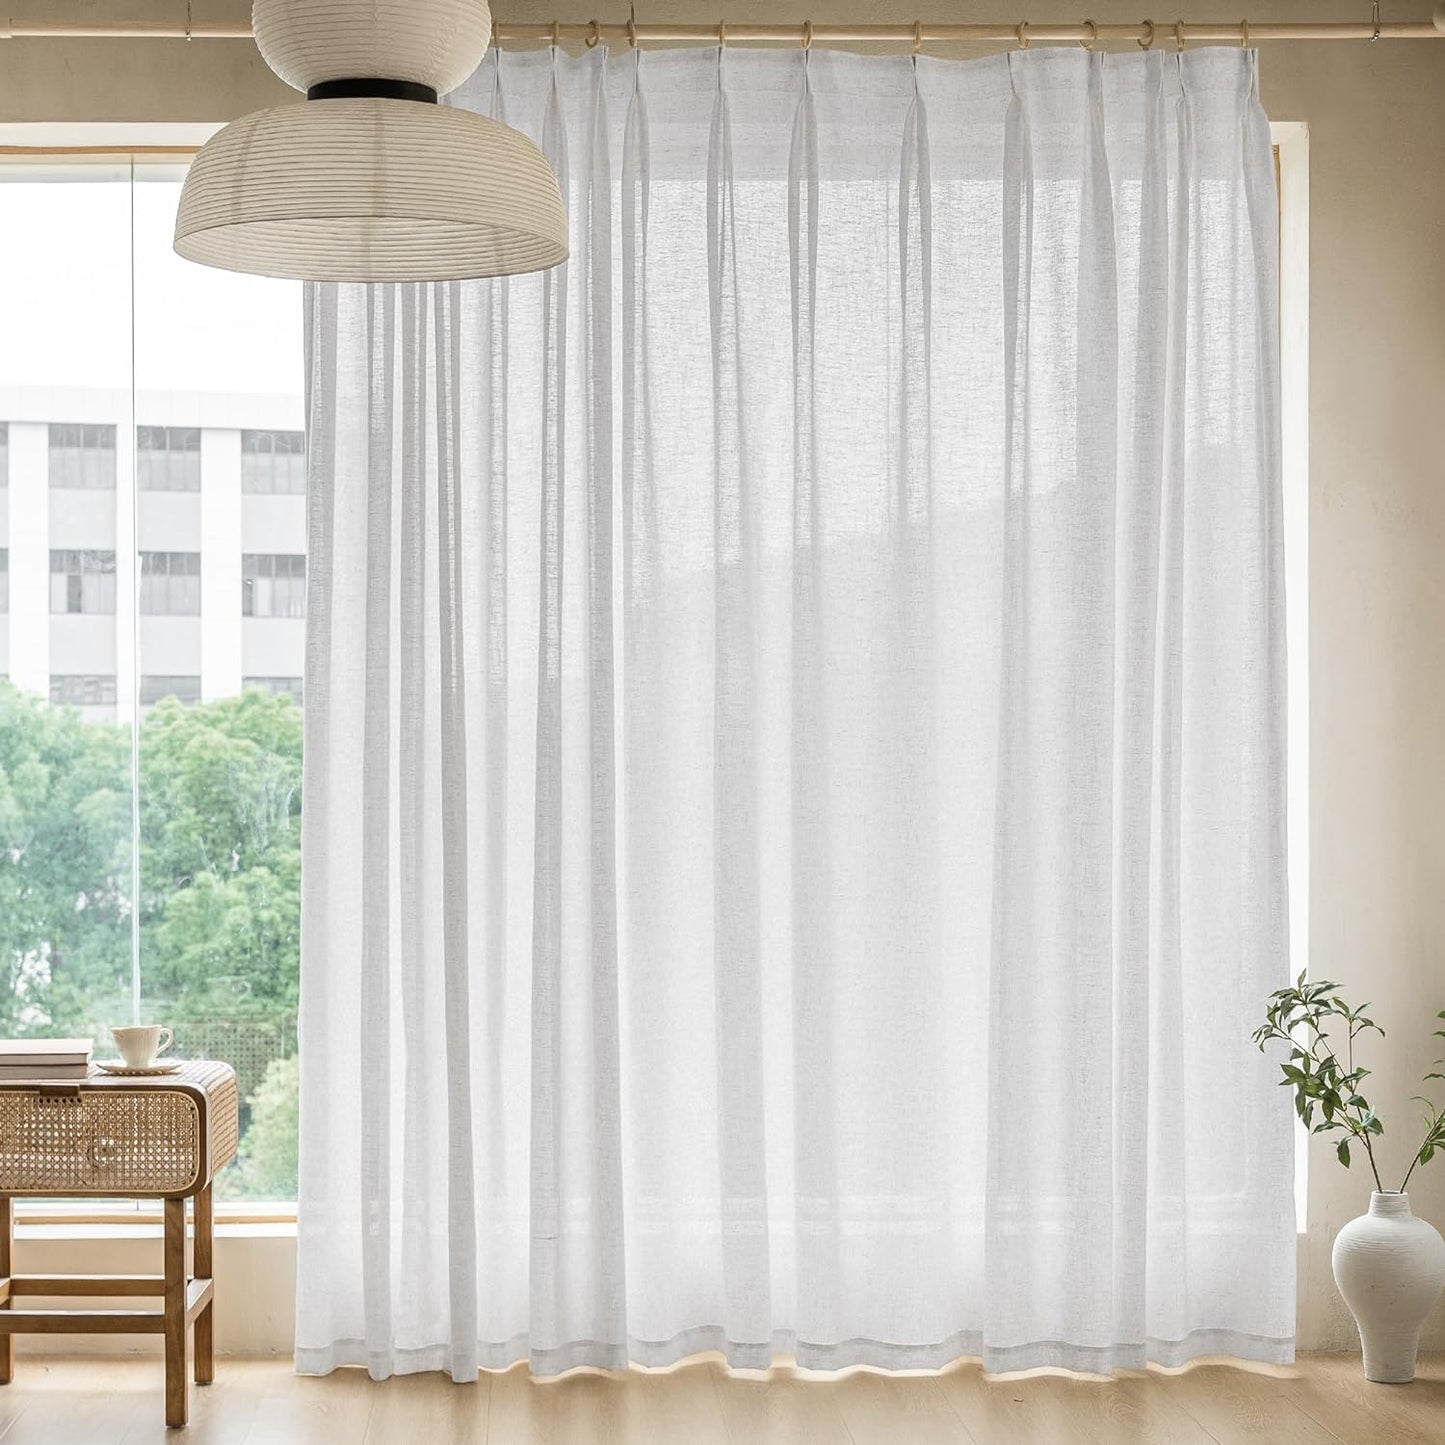 MAIHER Extra Wide Faux Linen Curtains Pinch Pleated, 108 Inches Long Light Filtering Semi Sheer Curtains Patio Door for Living Room, Pinch Pleat Drapes with Hooks (1 Panel, 84" W X 108" L)  MAIHER Beige White 100X108 